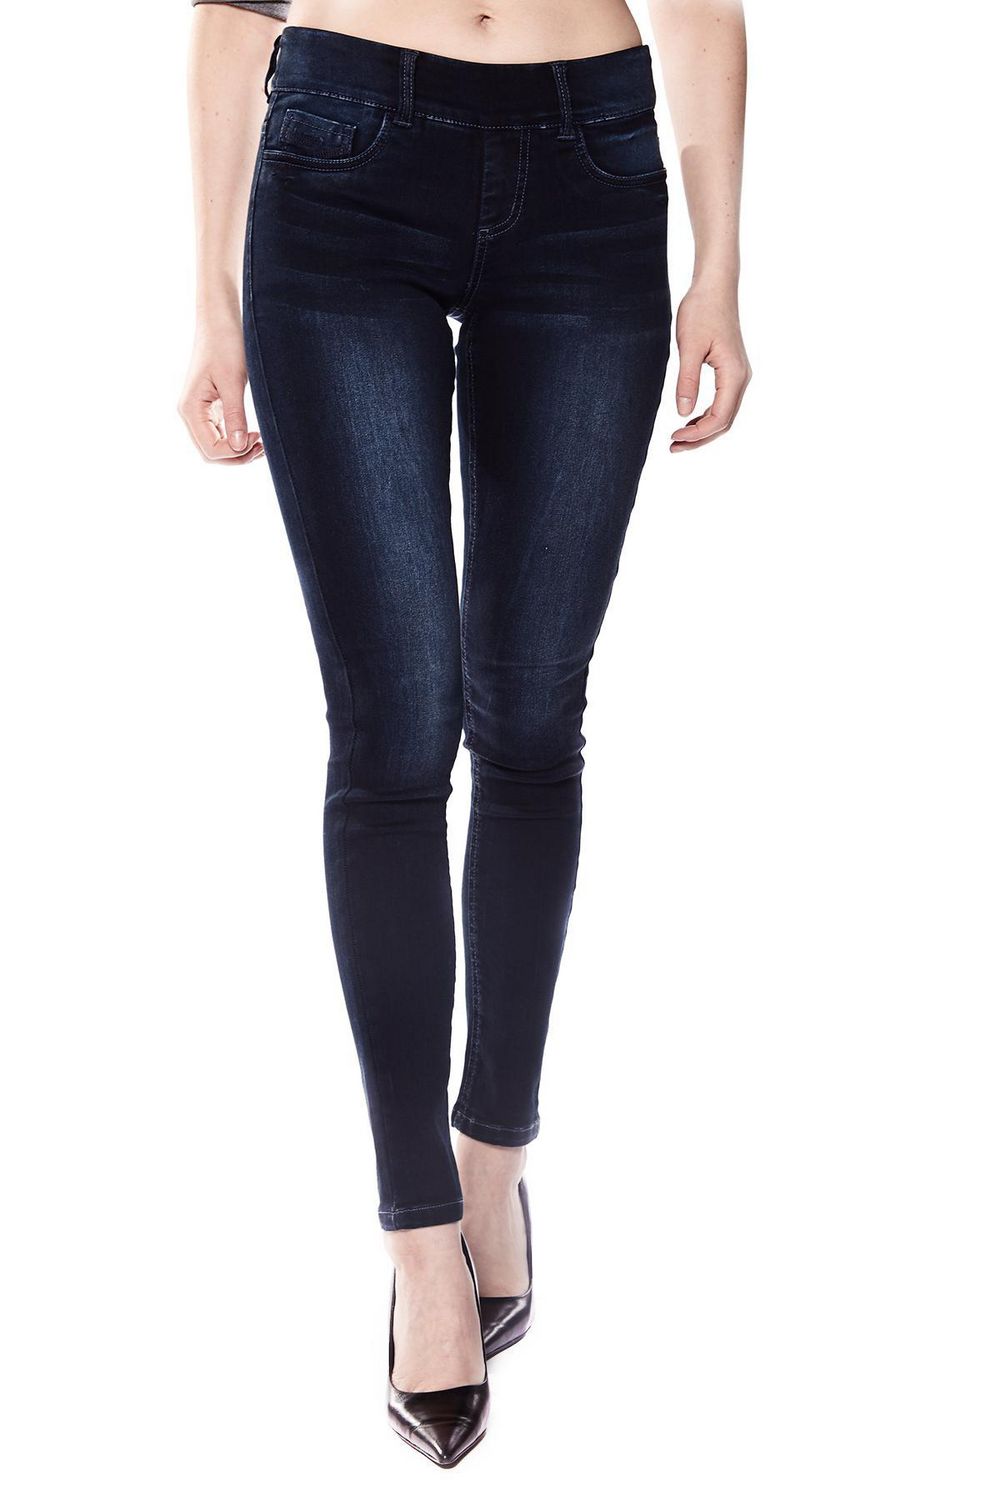 Buy MINERAL Womens Solid Jeggings